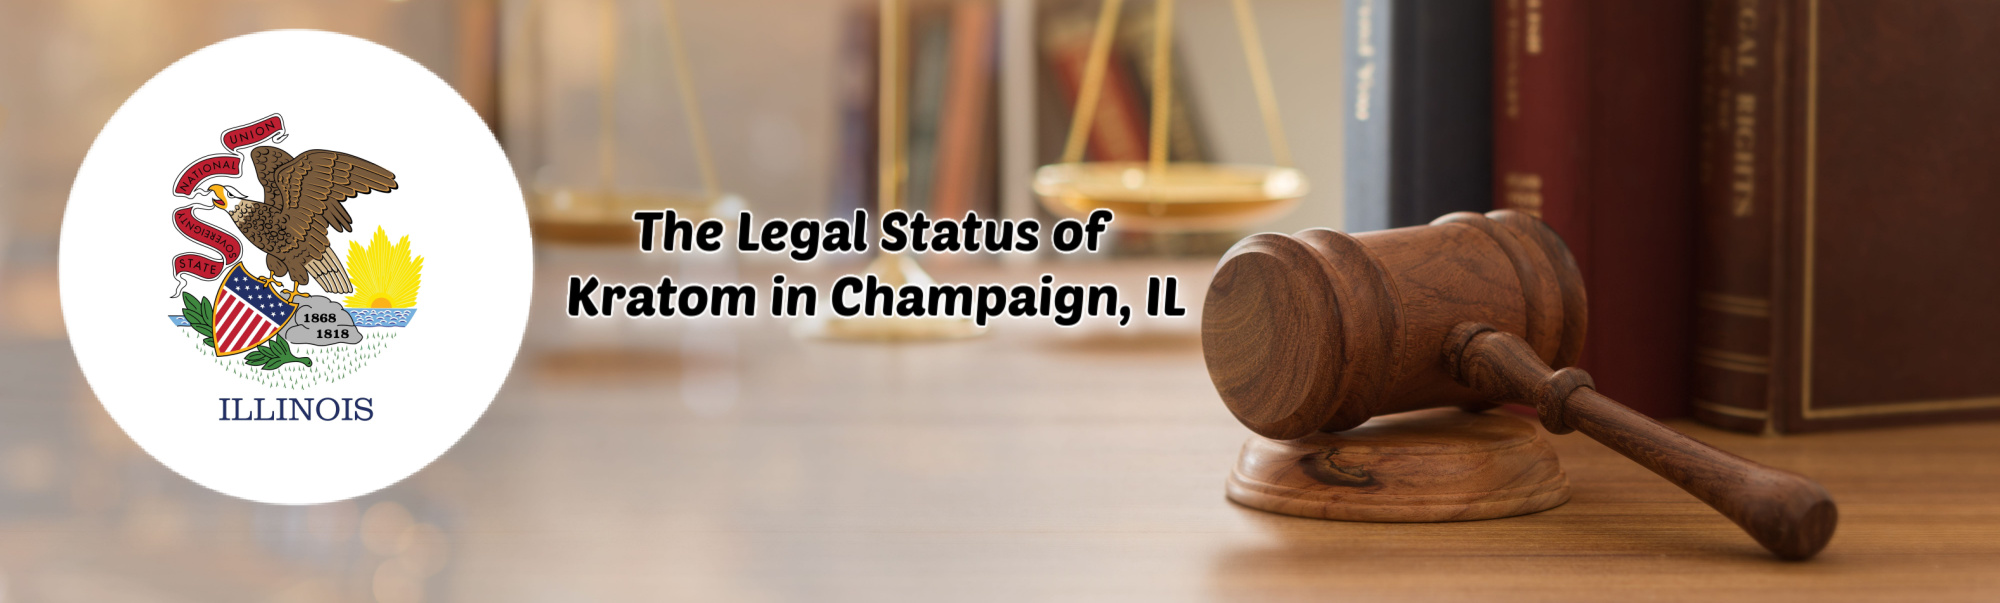 image of the legal status of kratom in champaign il